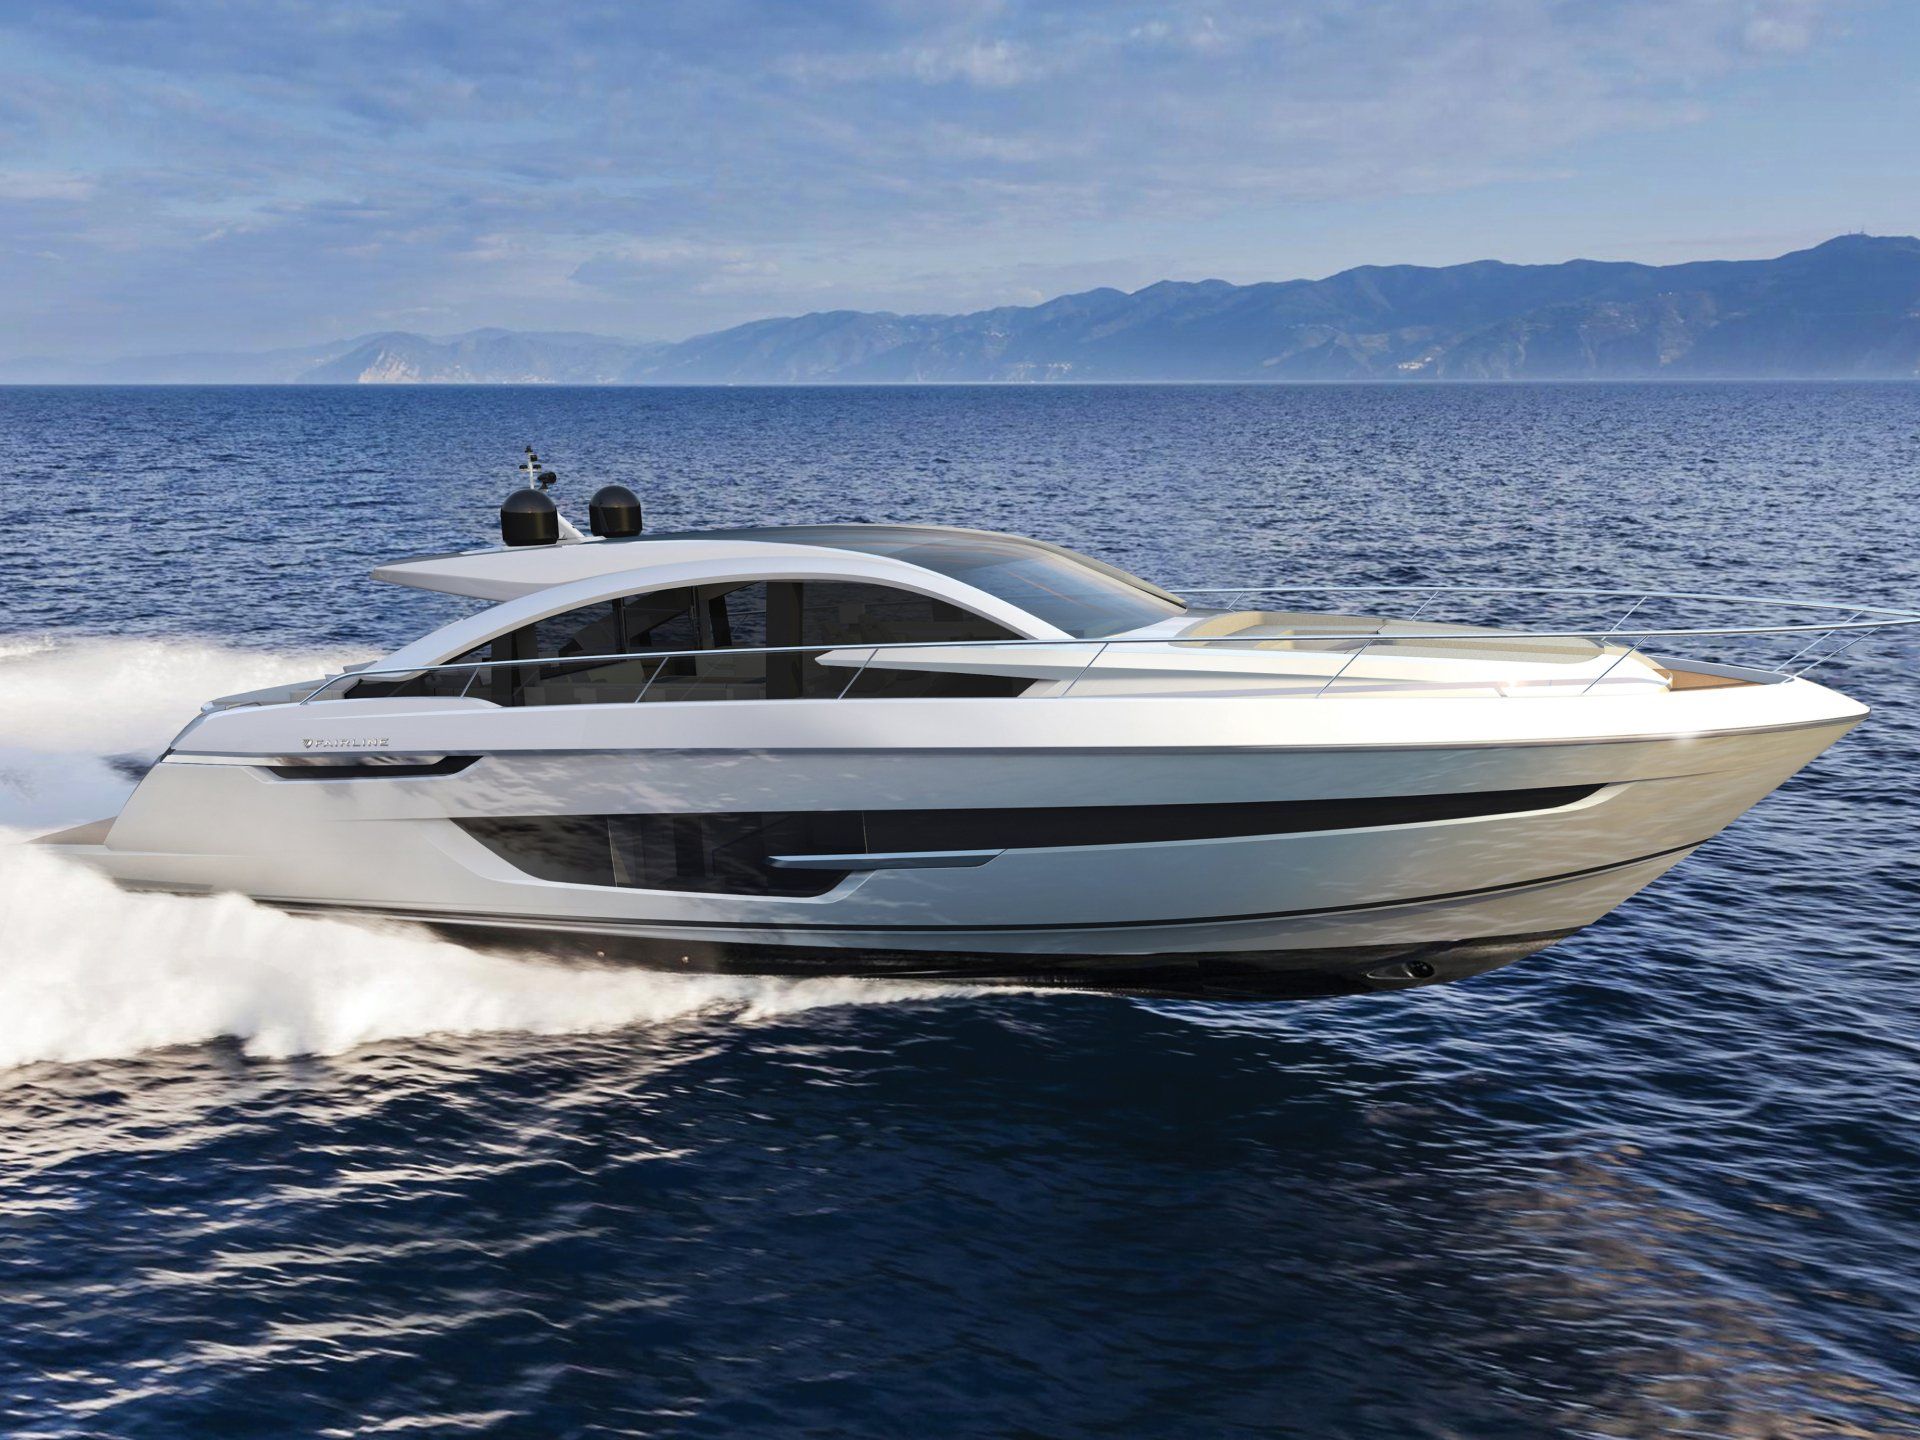 Computer generated image of the Fairline Yachts Targa 63 GTO designed by Alberto Mancini.